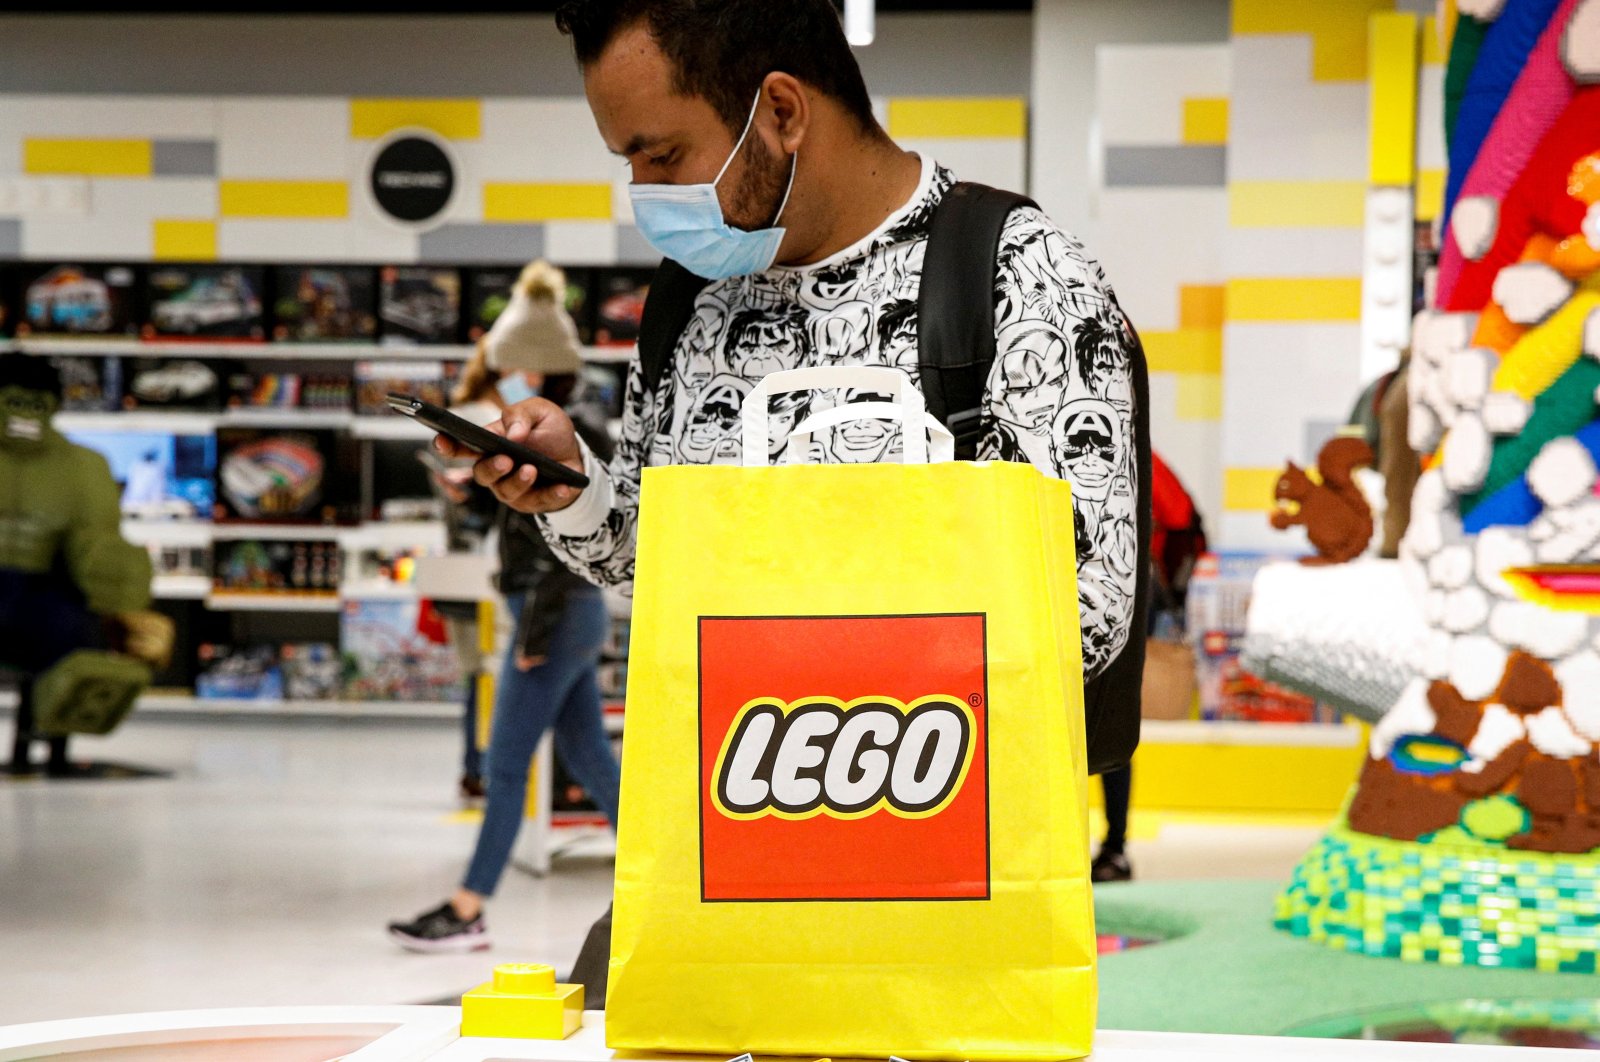 A customer uses his phone while shopping in the 5th Avenue Lego store in New York City, U.S., Sept. 28, 2021. (Reuters Photo)